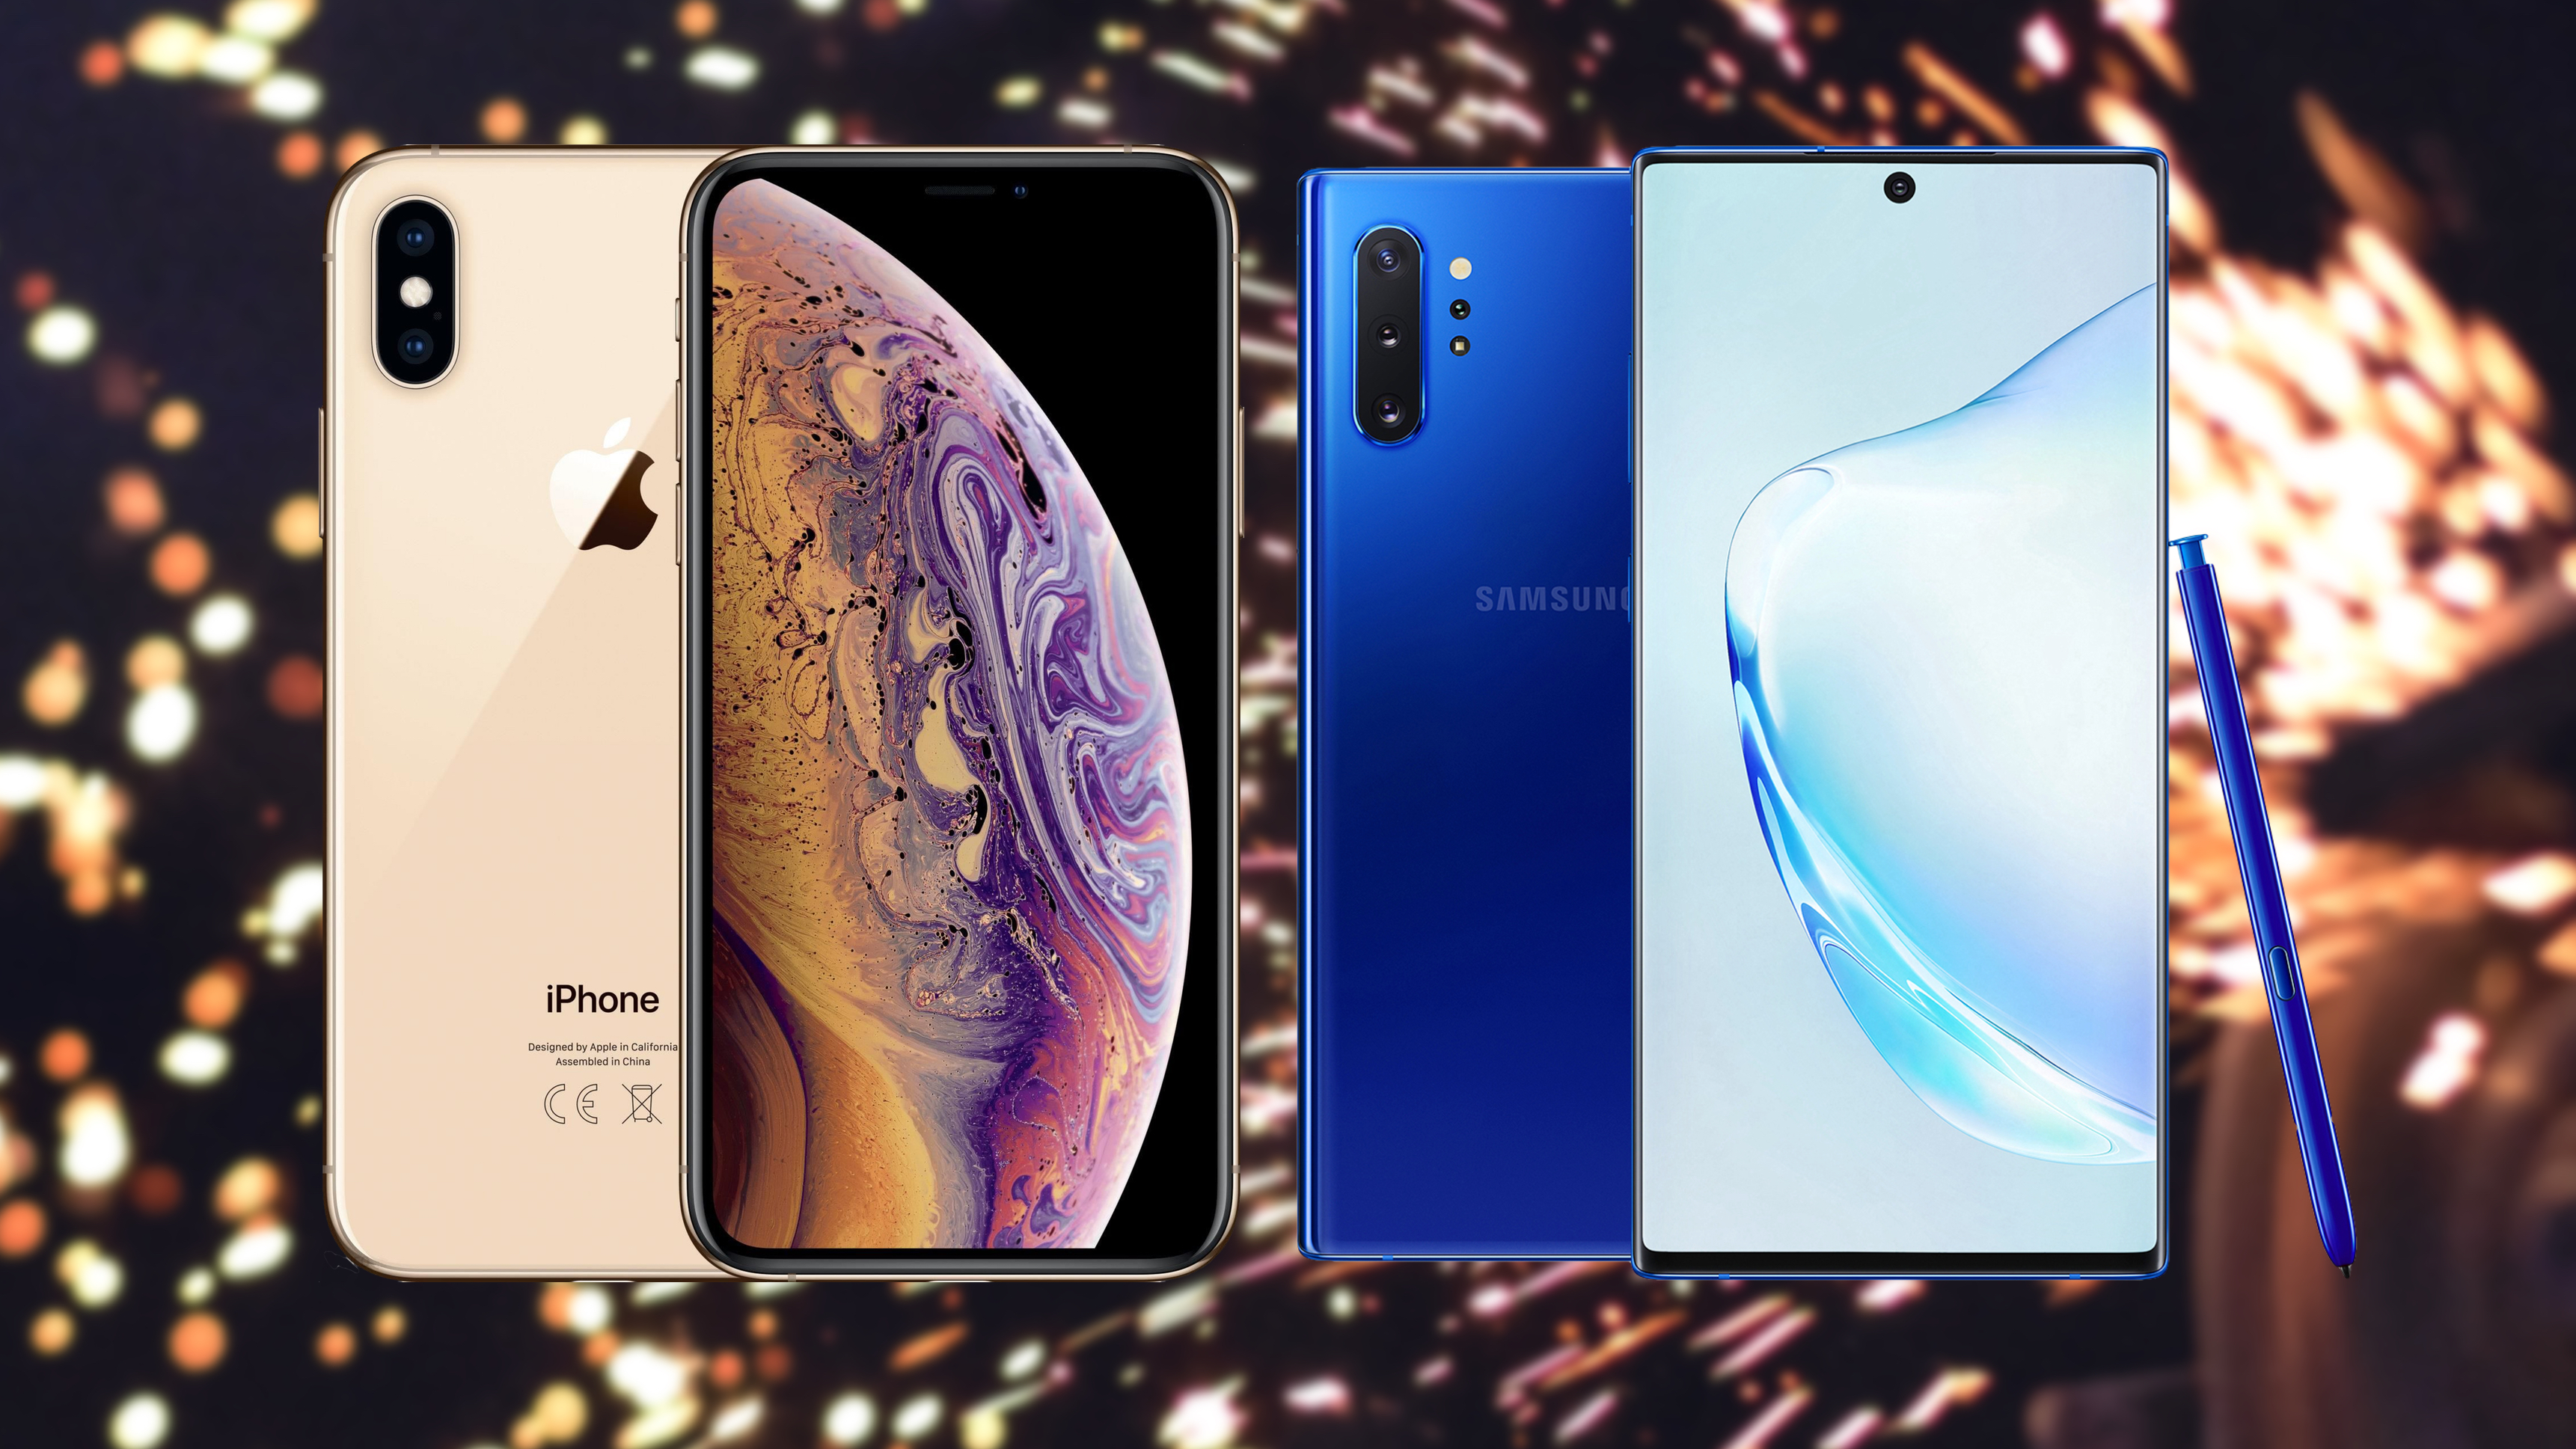 Samsung Galaxy Note 10 Vs Iphone Xs Max One Of These Just Lost A Key Test T3